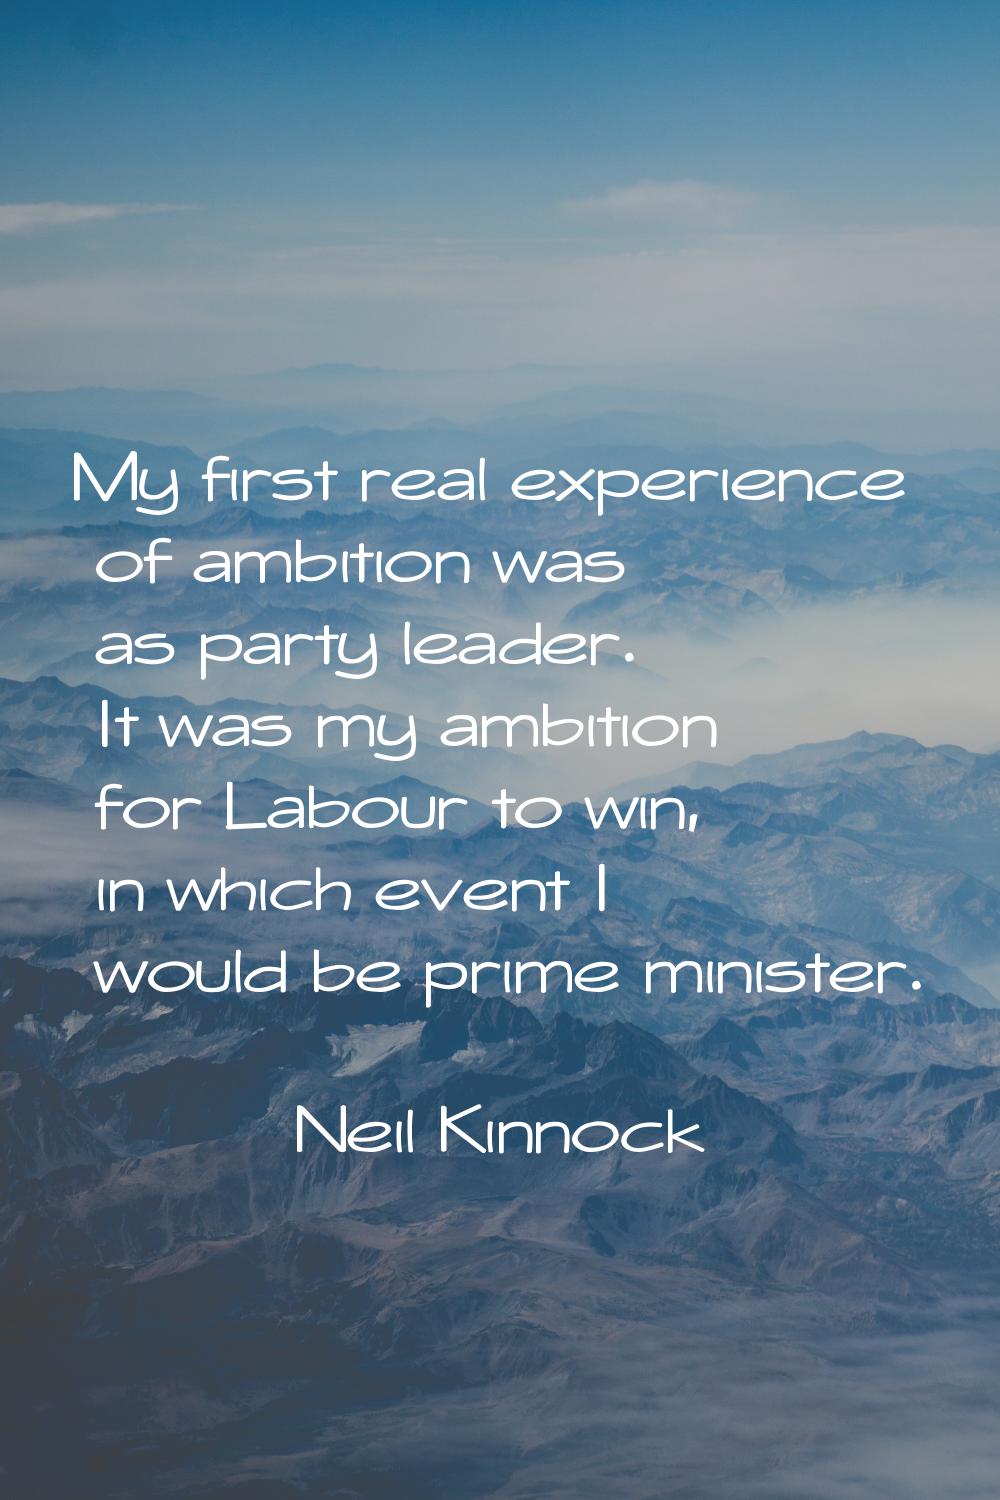 My first real experience of ambition was as party leader. It was my ambition for Labour to win, in 